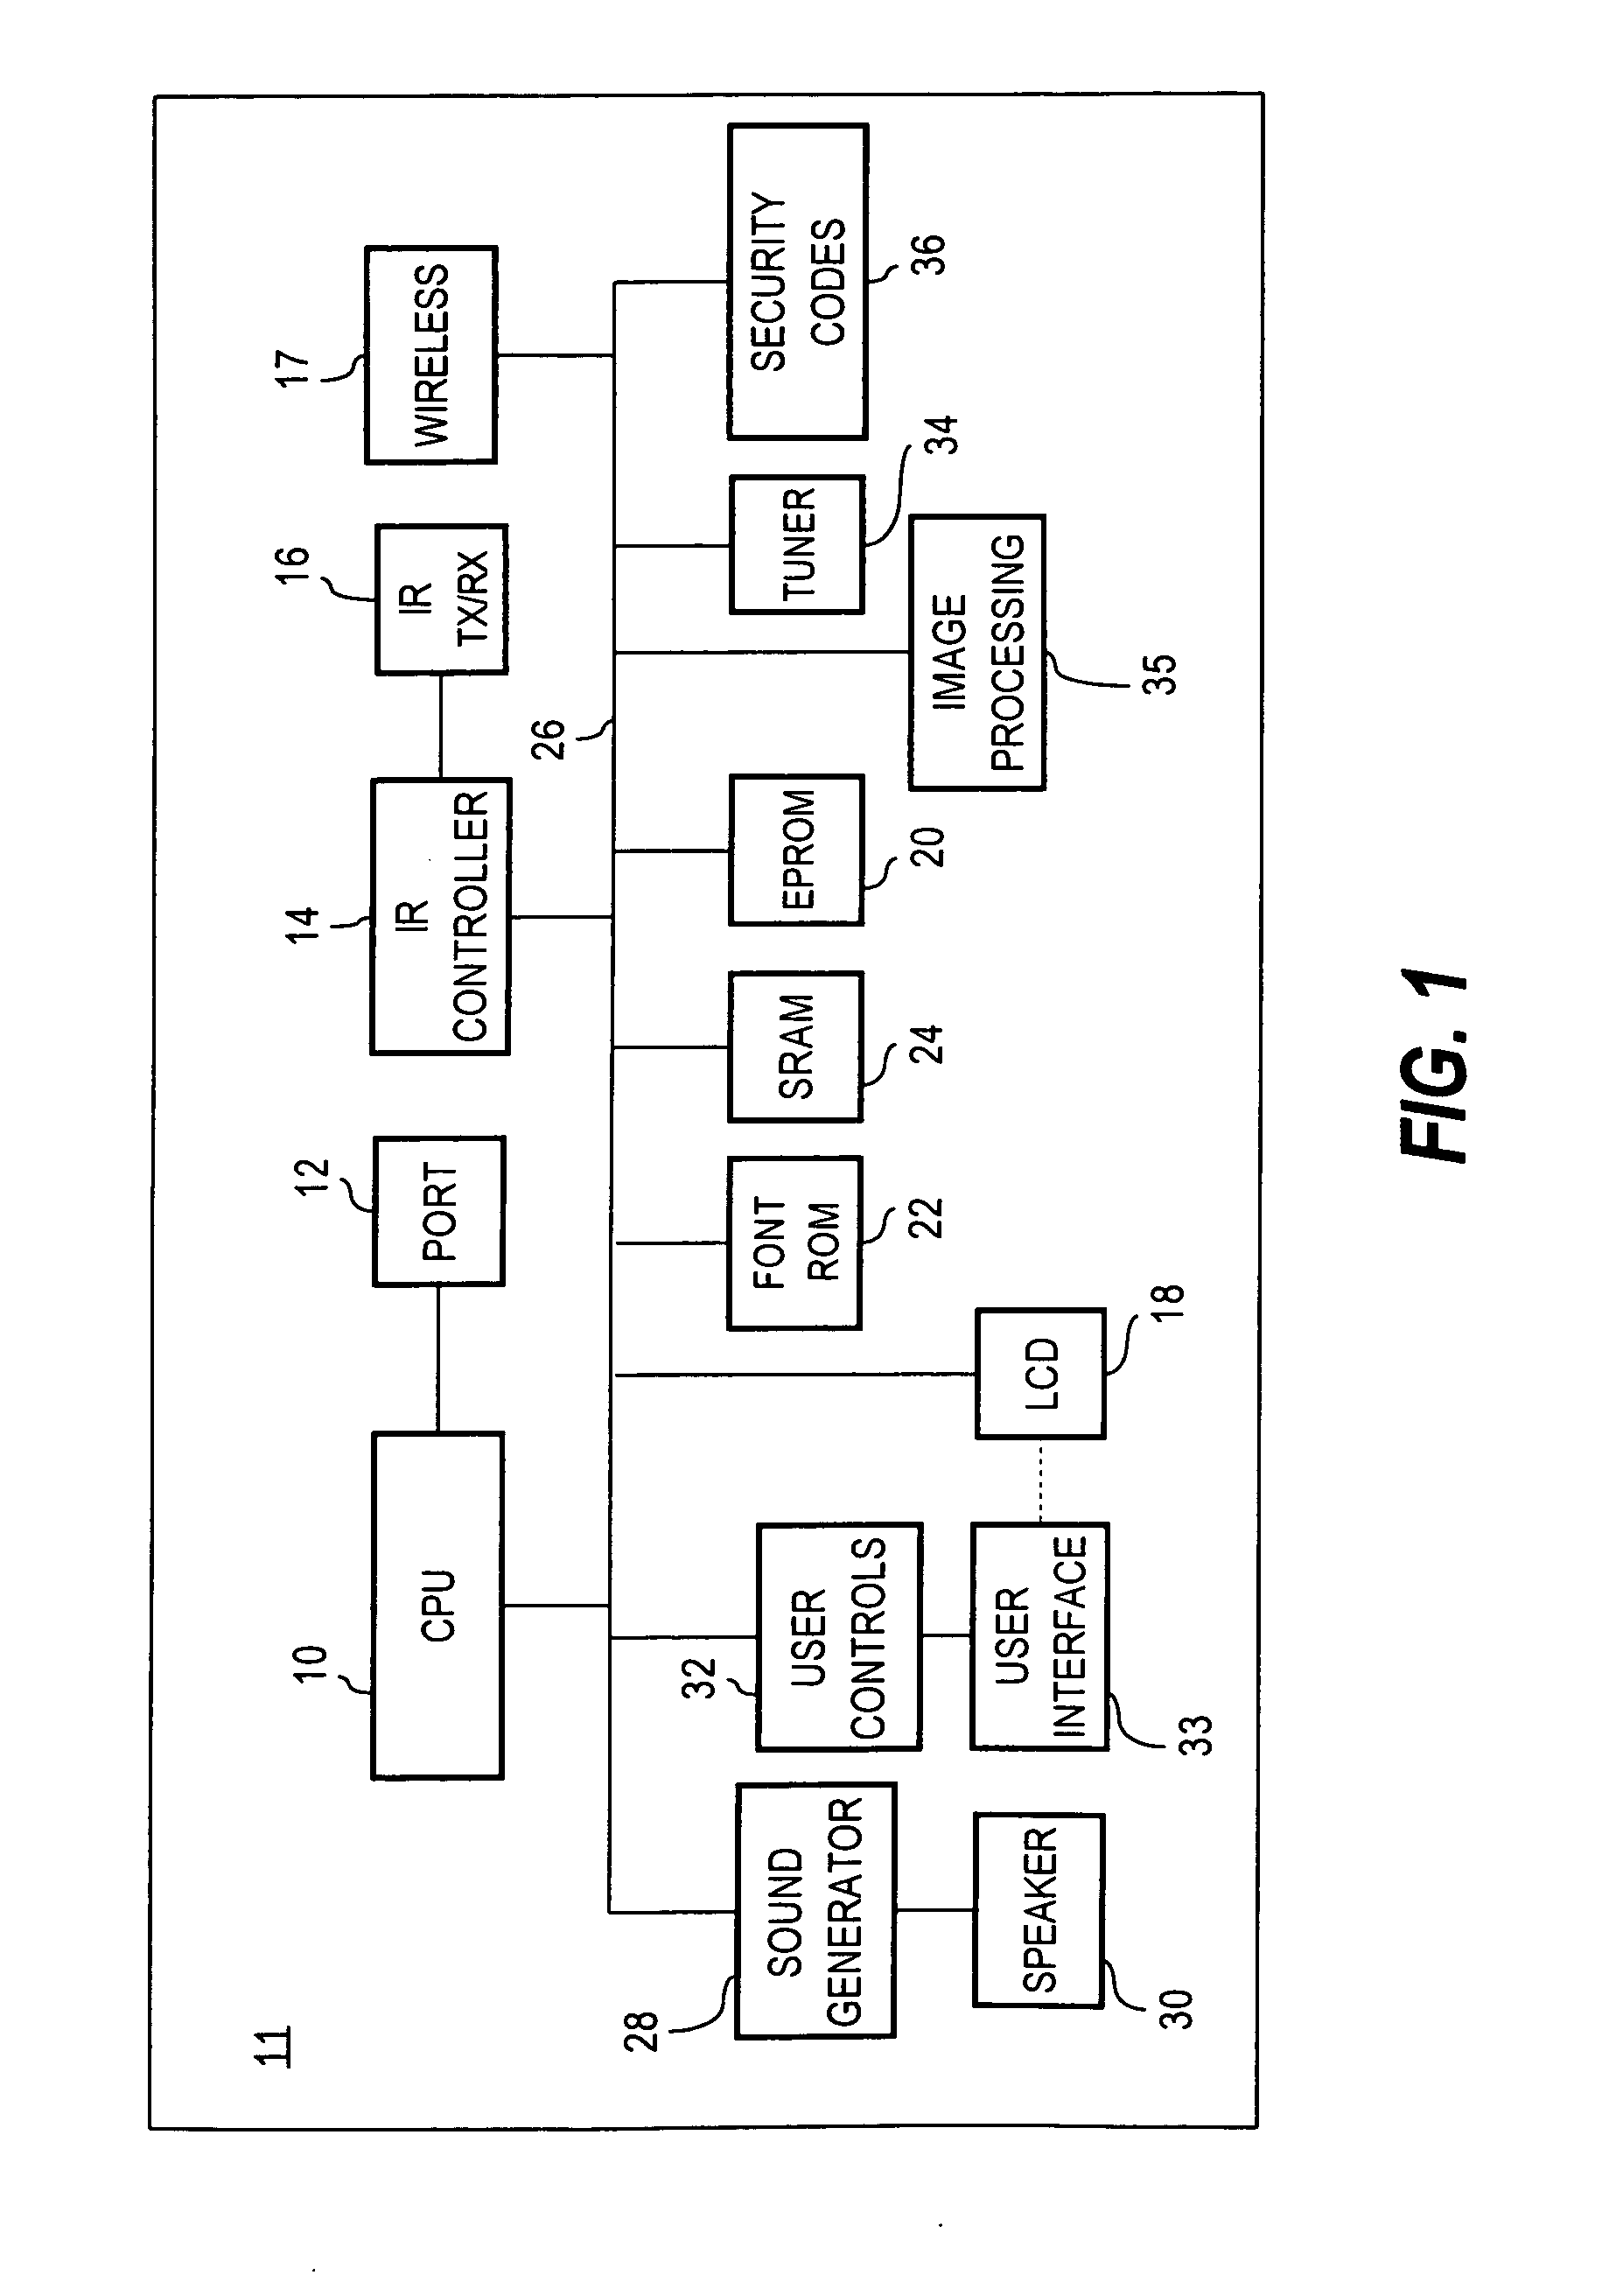 Broadcasting venue data to a wireless hand held device